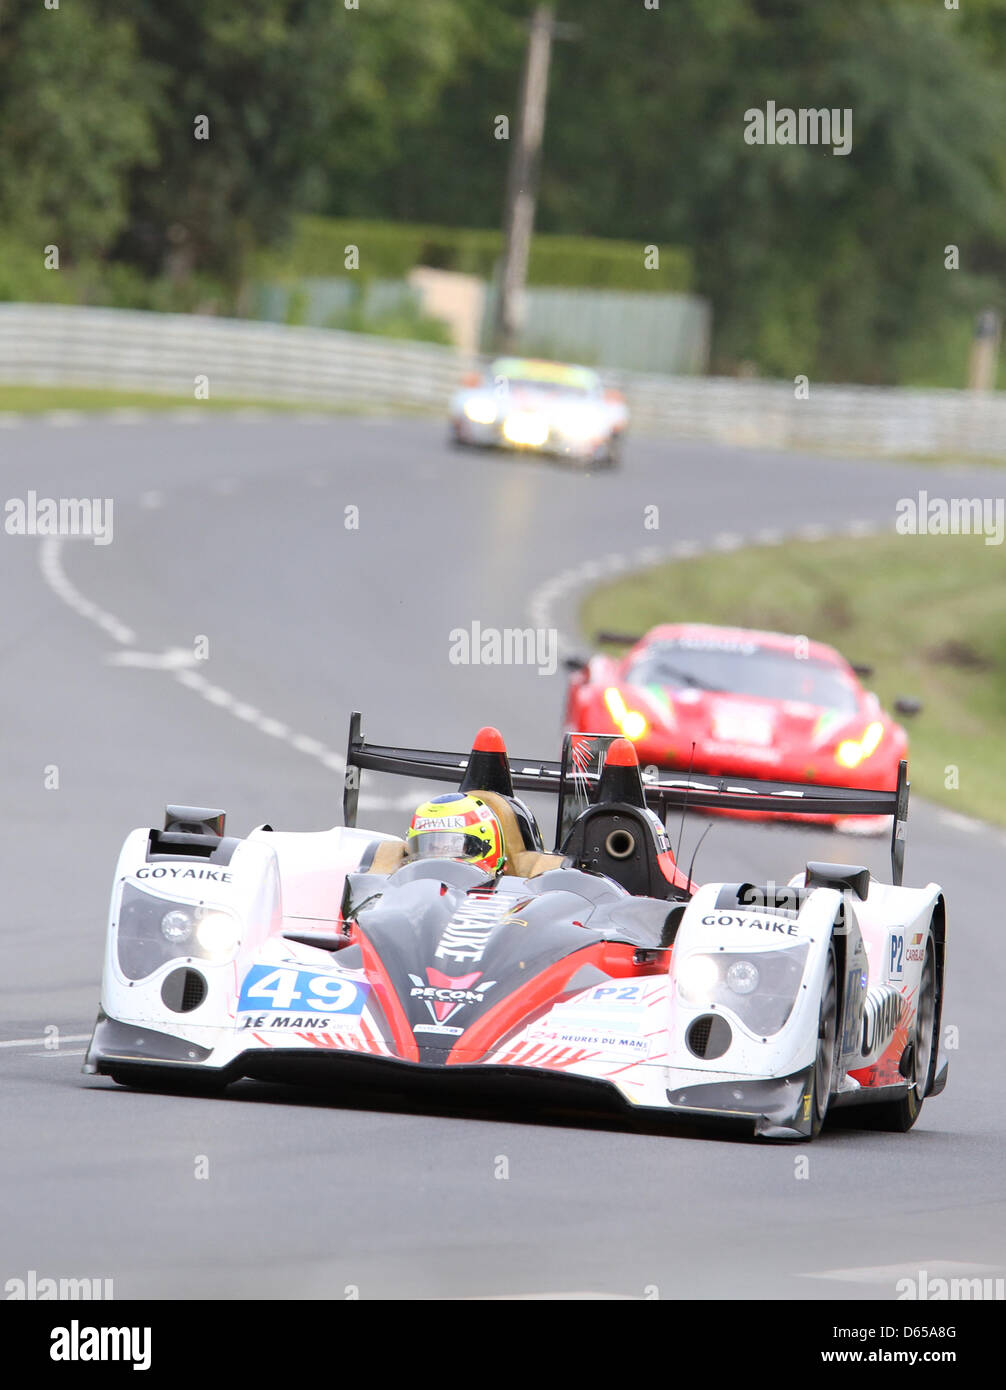 The LMP2 class Oreca 03 of Pecom Racing with drivers Luis Perez-Compac, Pierre Kaffer and Soheil Ayari in action during the qualifying for the 80th 24 Hours Race of Le Mans on the Circuit de la Sarthe in Le Mans, France 14 June 2012. Photo: Florian Schuh dpa Stock Photo